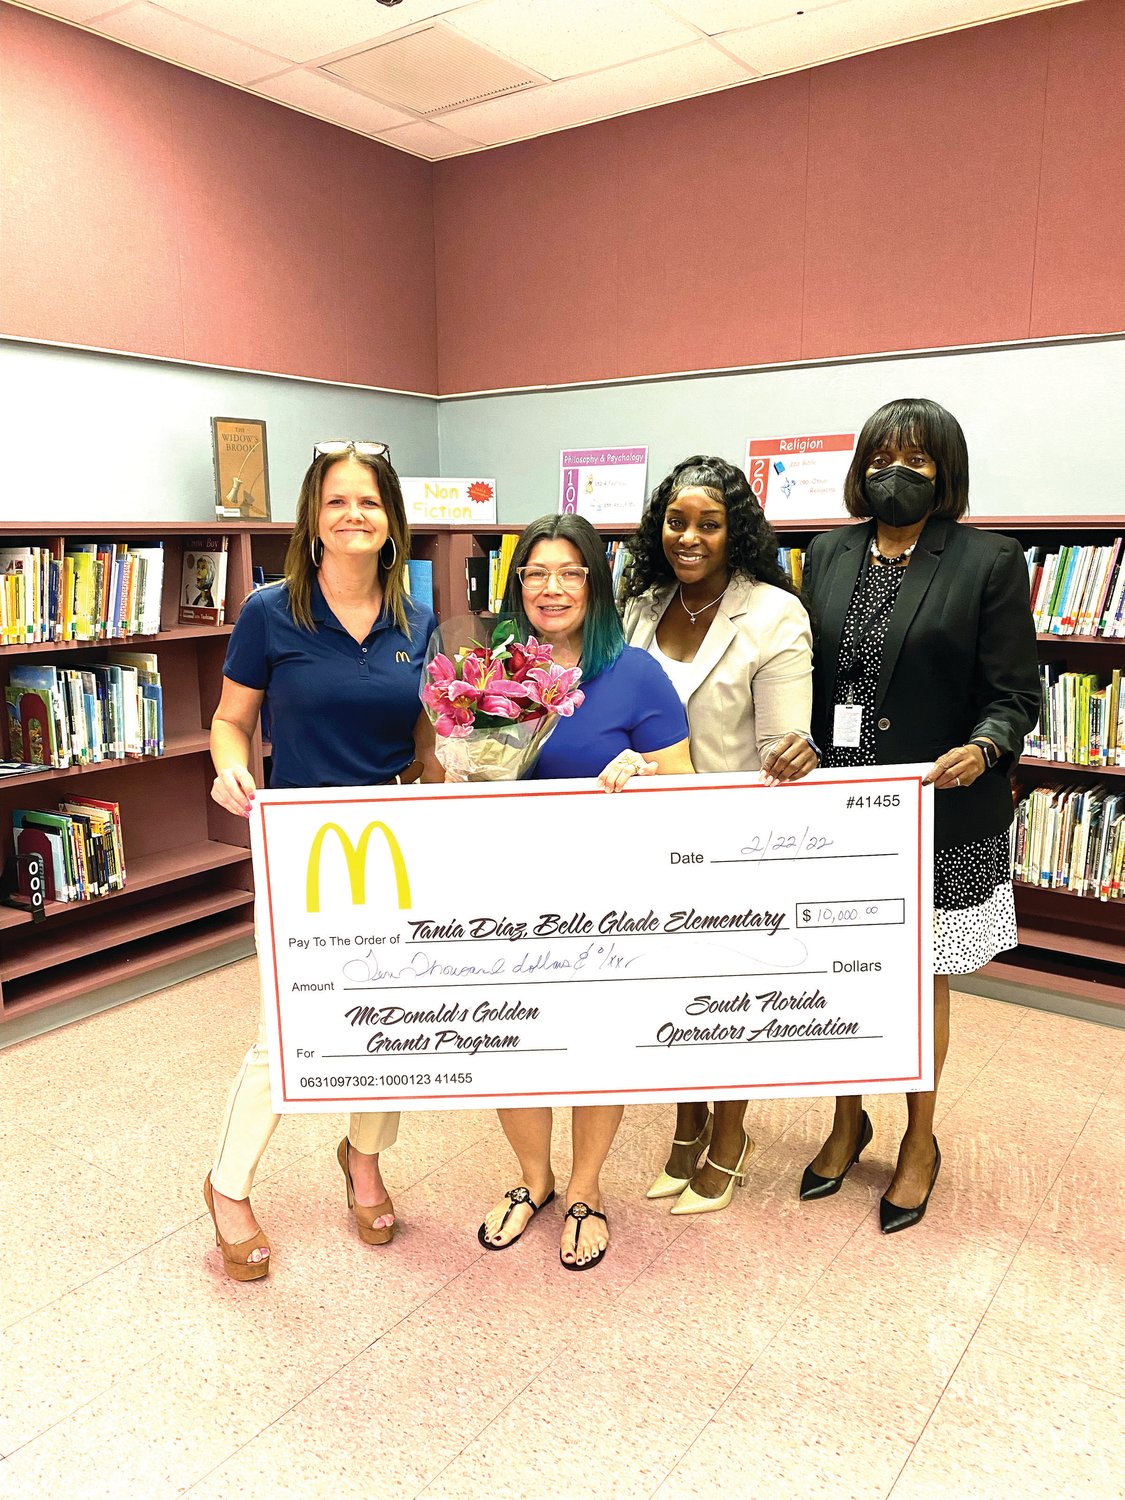 Ms. Diaz, accepted the grand prize award of $10,000 from local McDonald’s owner, Amanda Nisbet.